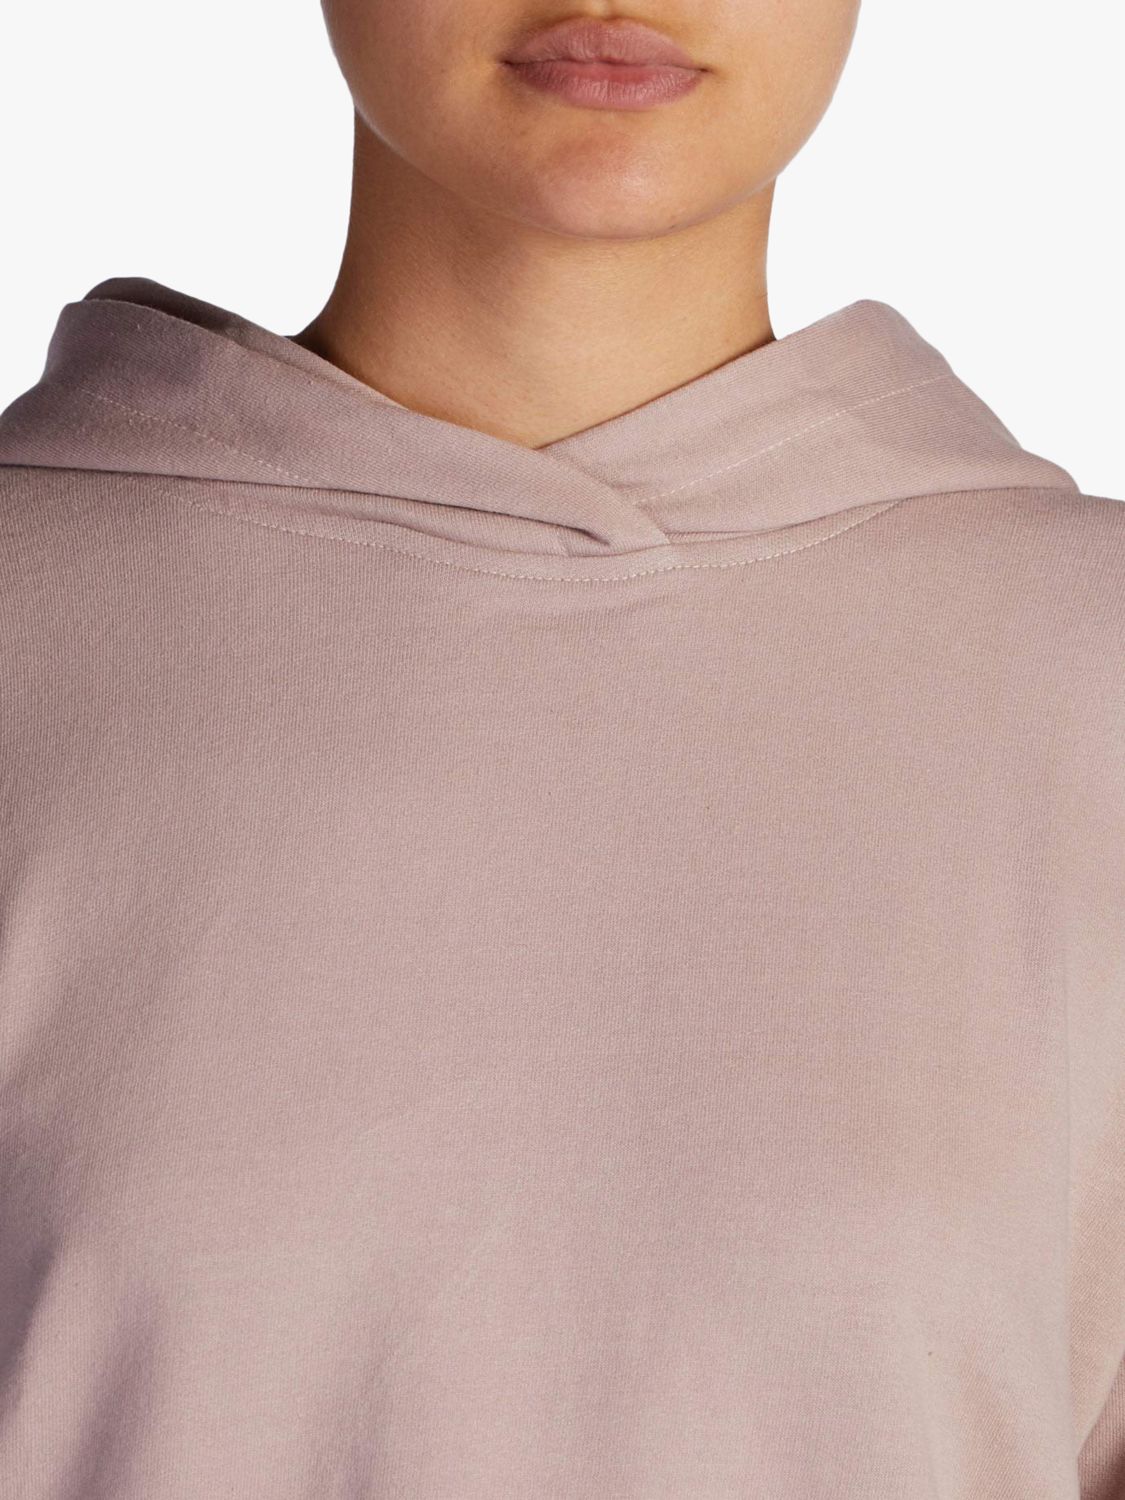 Buy Aab Cocoon Cotton Hoody Online at johnlewis.com